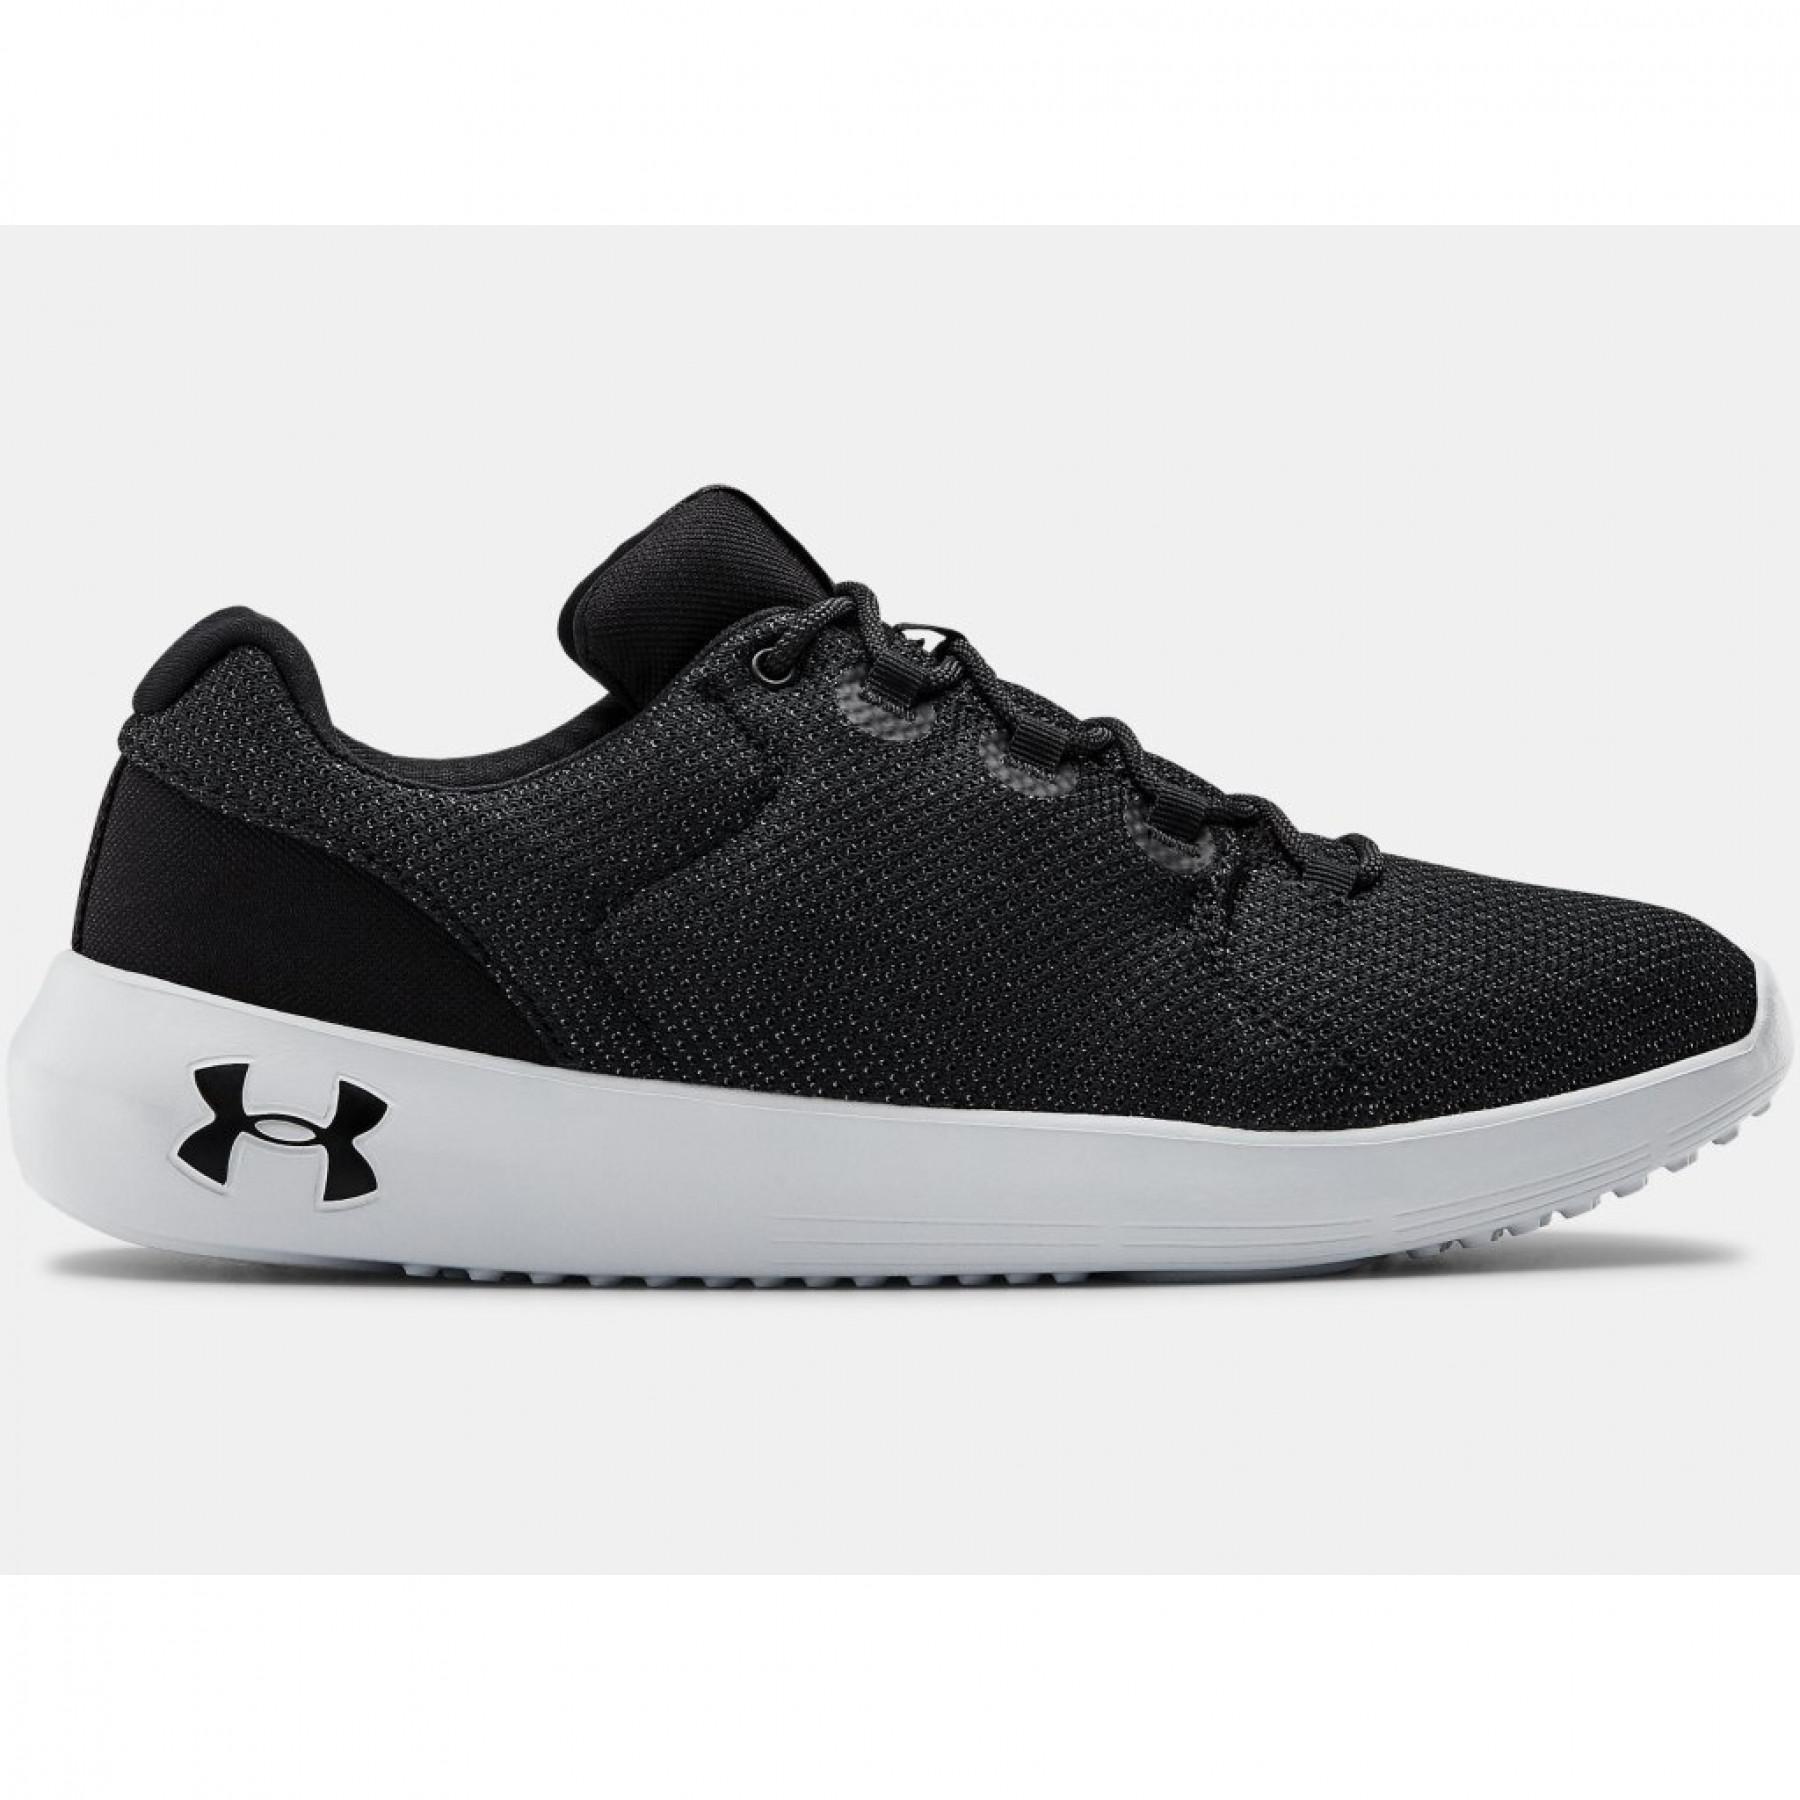 Formadores Under Armour Ripple 2.0 NM1